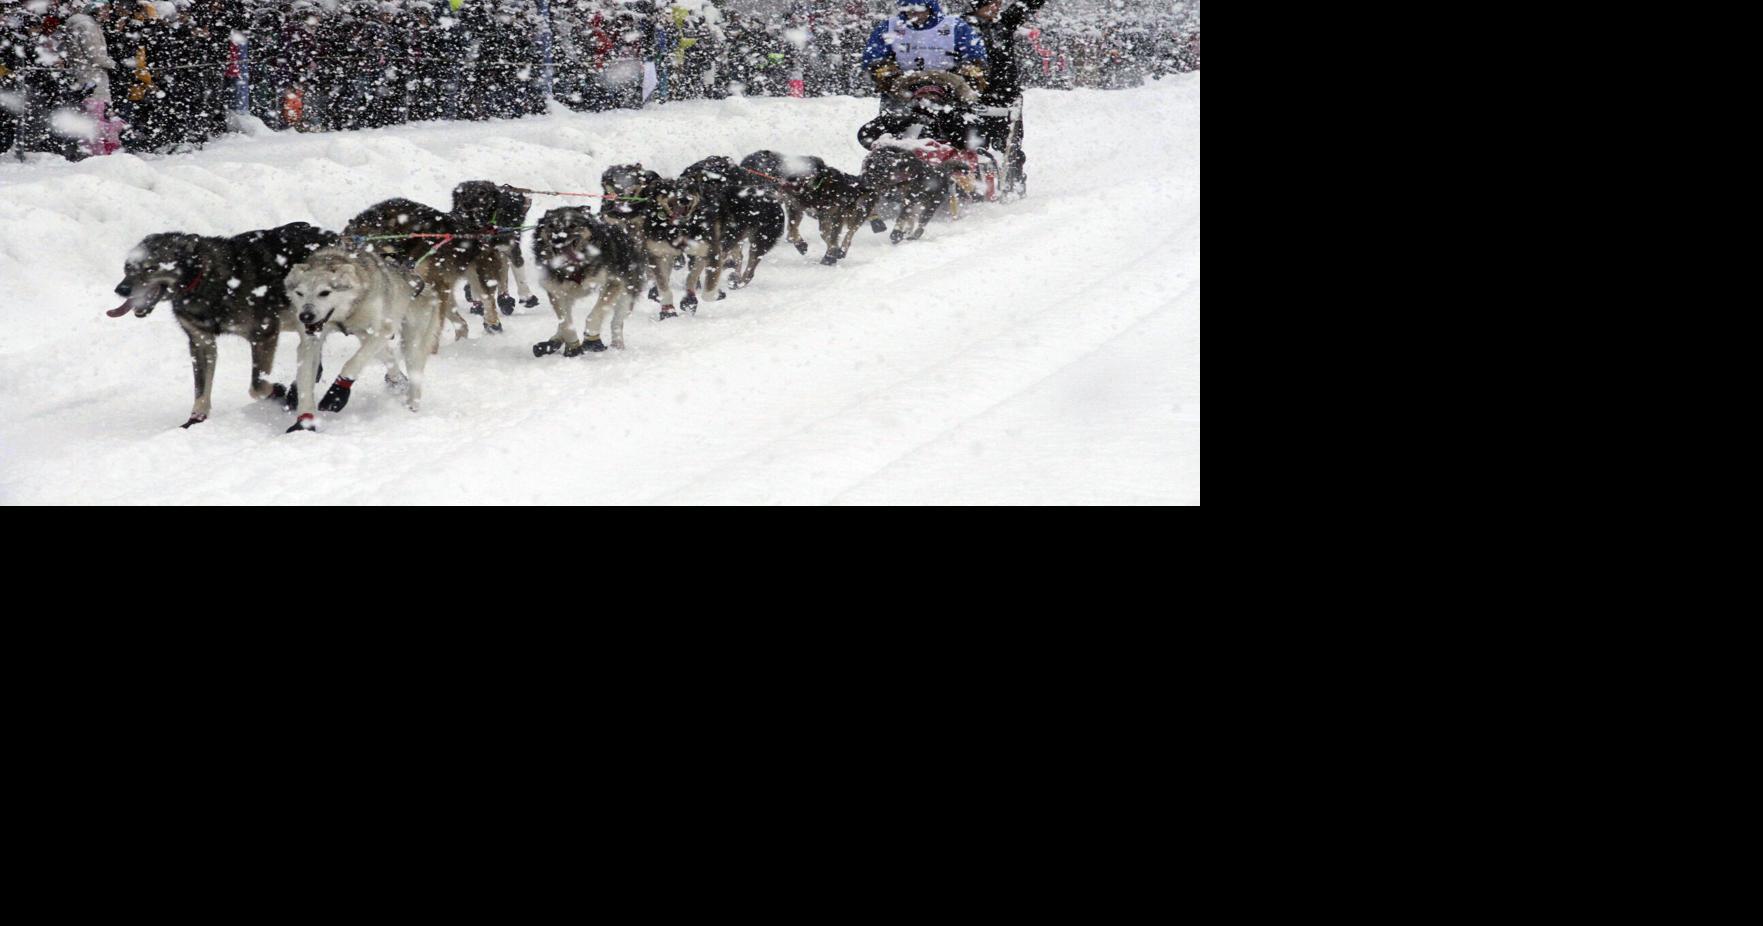 ‘A little scary’: Iditarod begins with smallest field ever